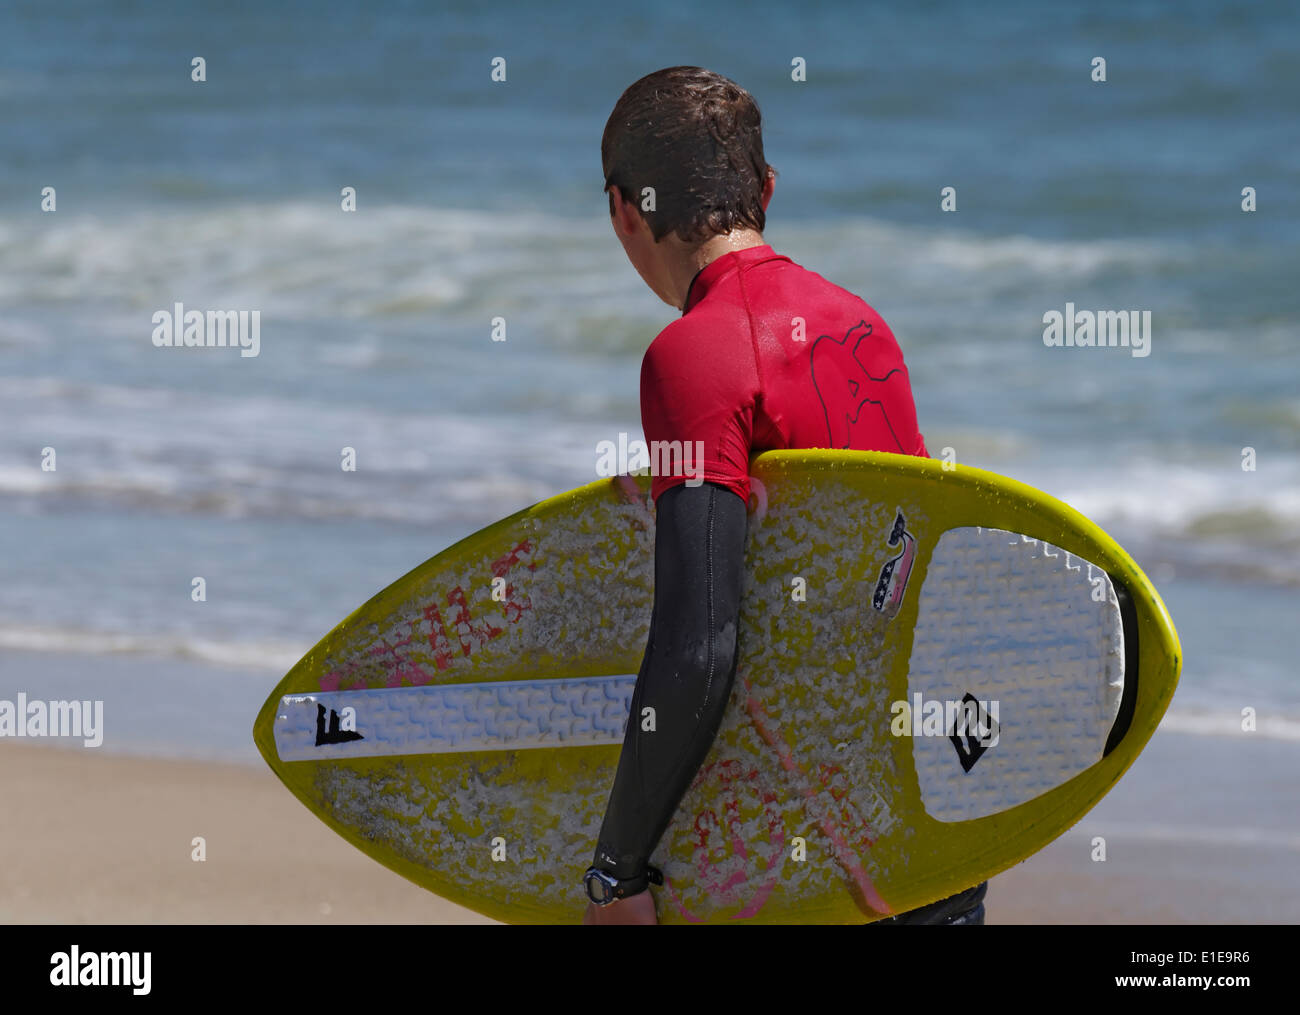 Skimboarder Wearing Wetsuit Searching For A Wave Stock Photo